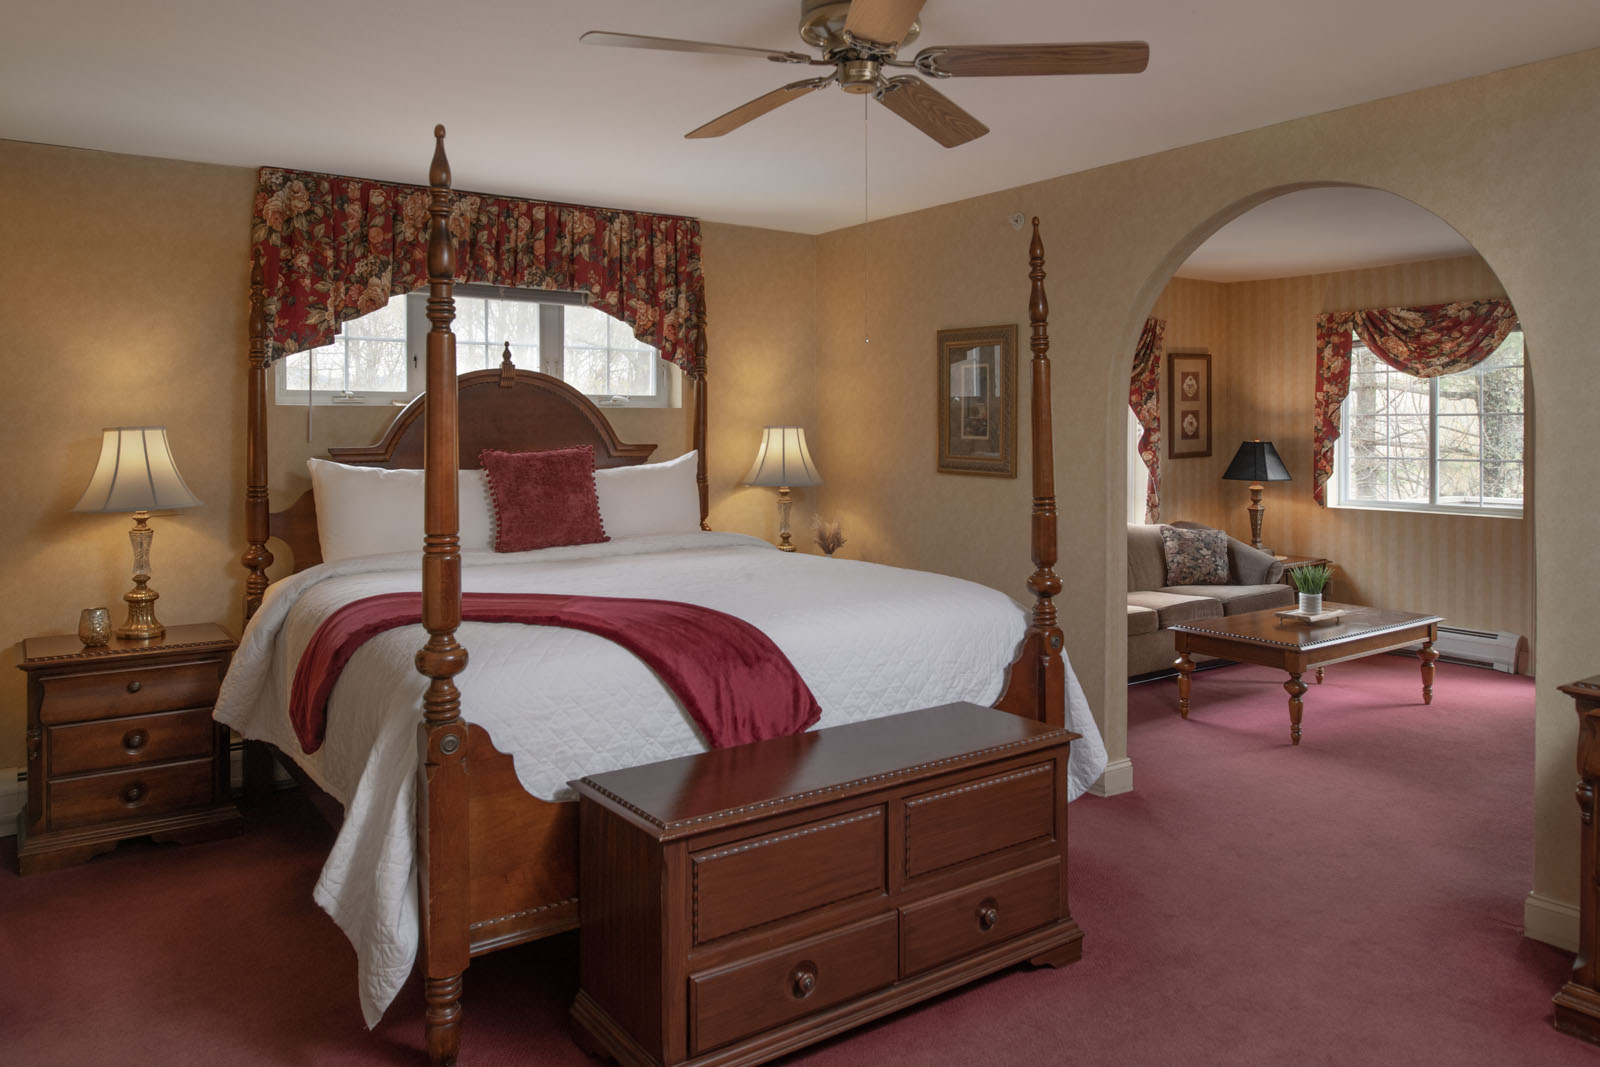 Carriage House Suites in Jackson NH